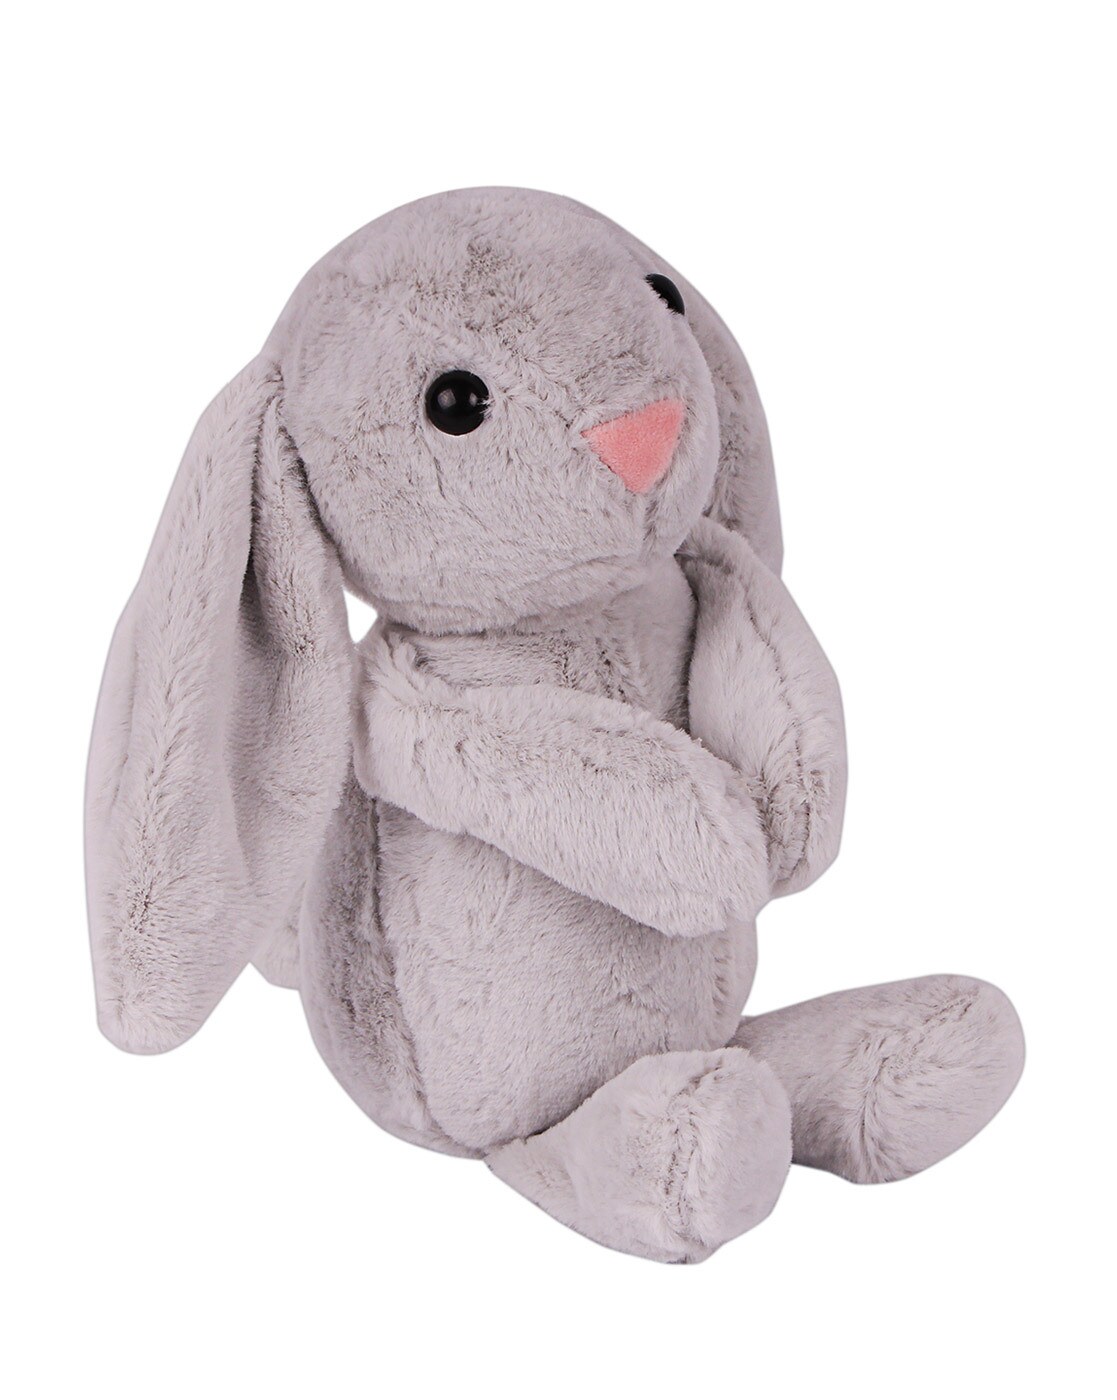 Buy Purple Soft Toys for Toys & Baby Care by Dukiekooky Online